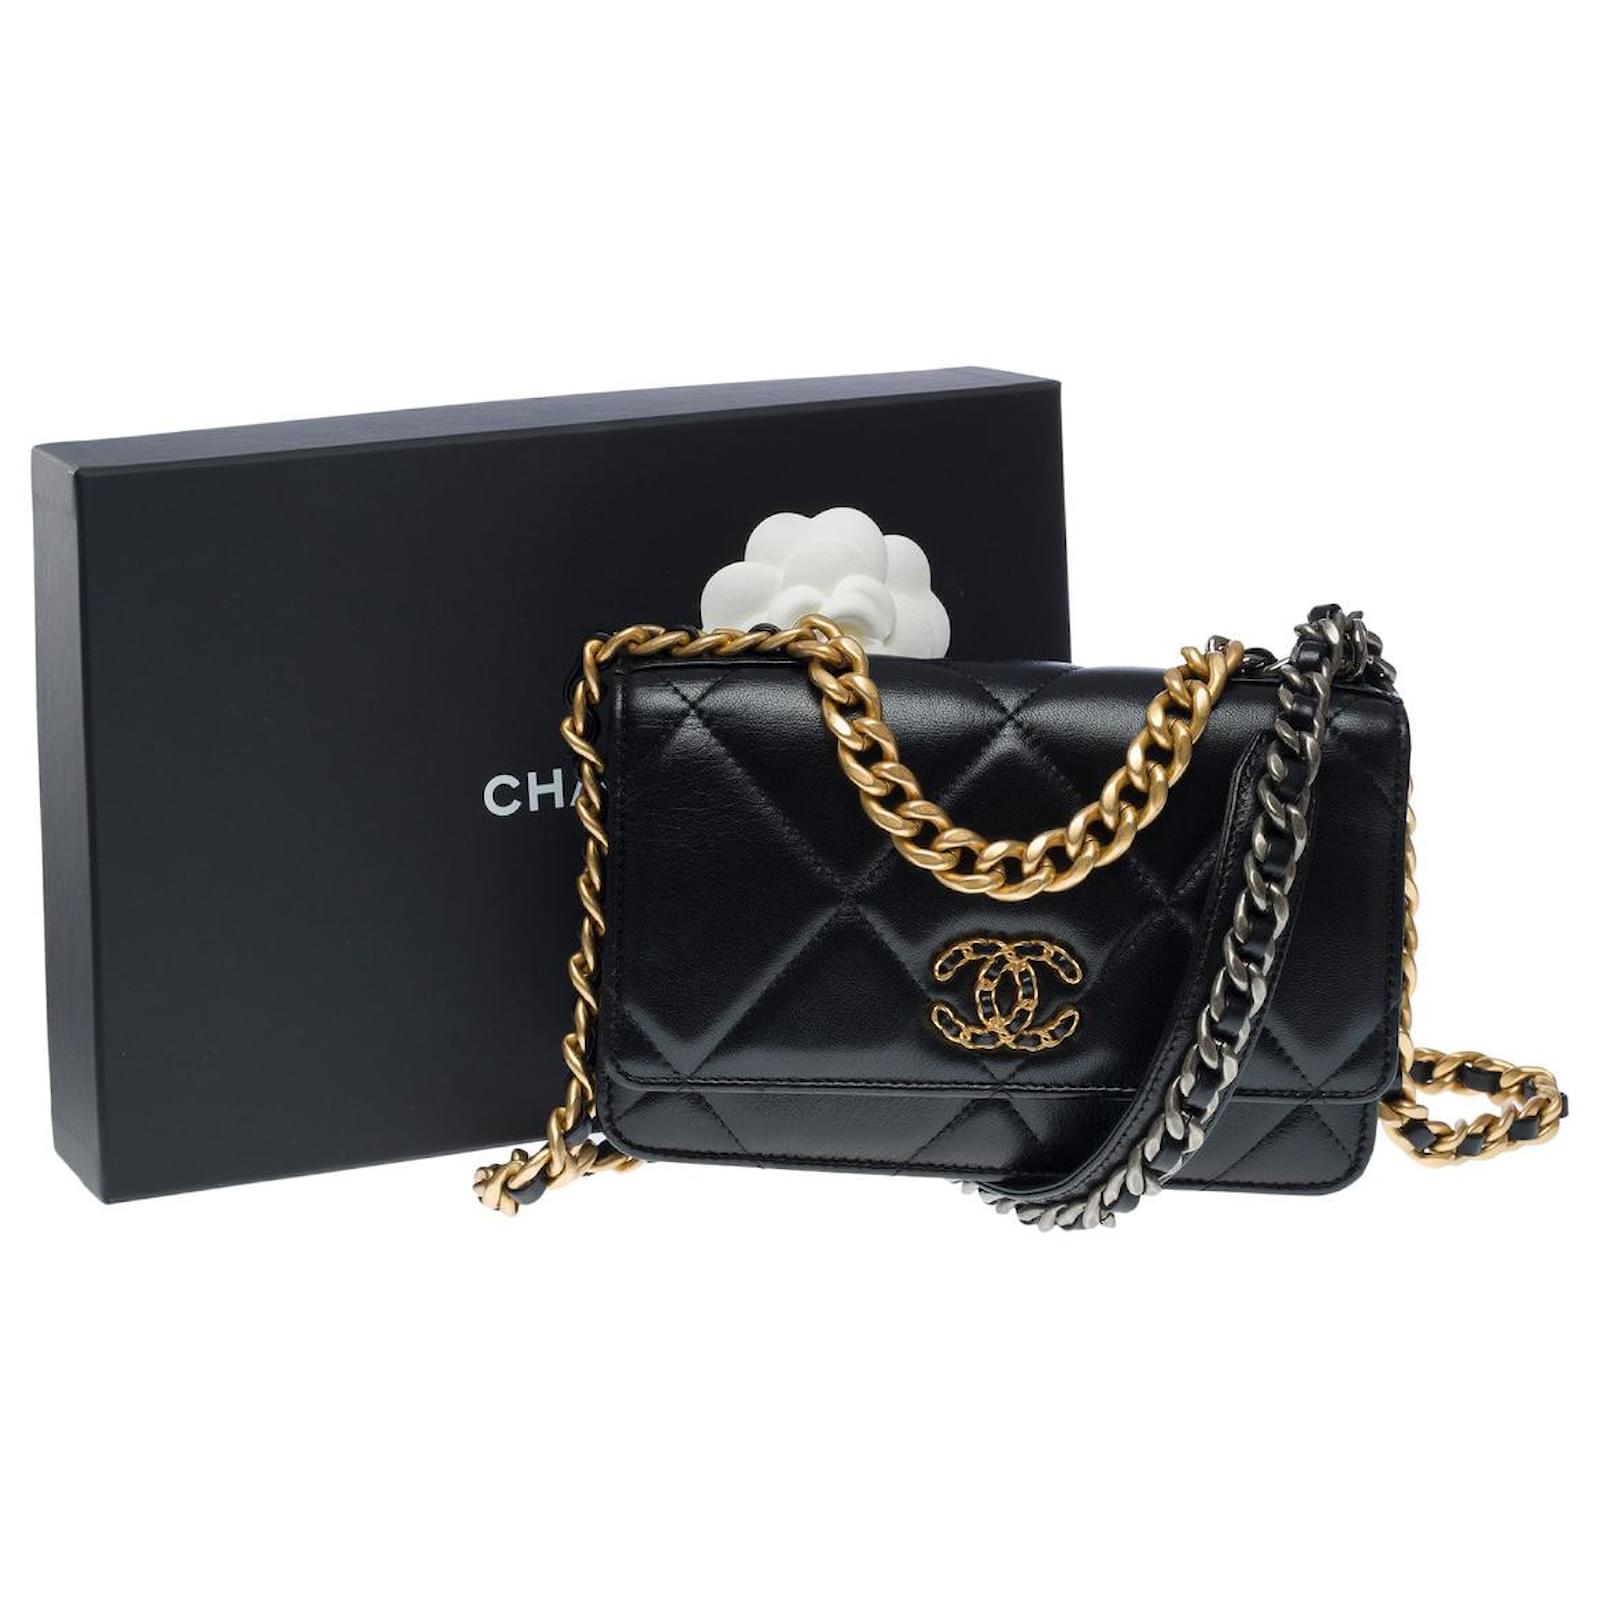 Misc Chanel Chanel Wallet on Chain Chanel Bag 19 in Black Leather - 101423